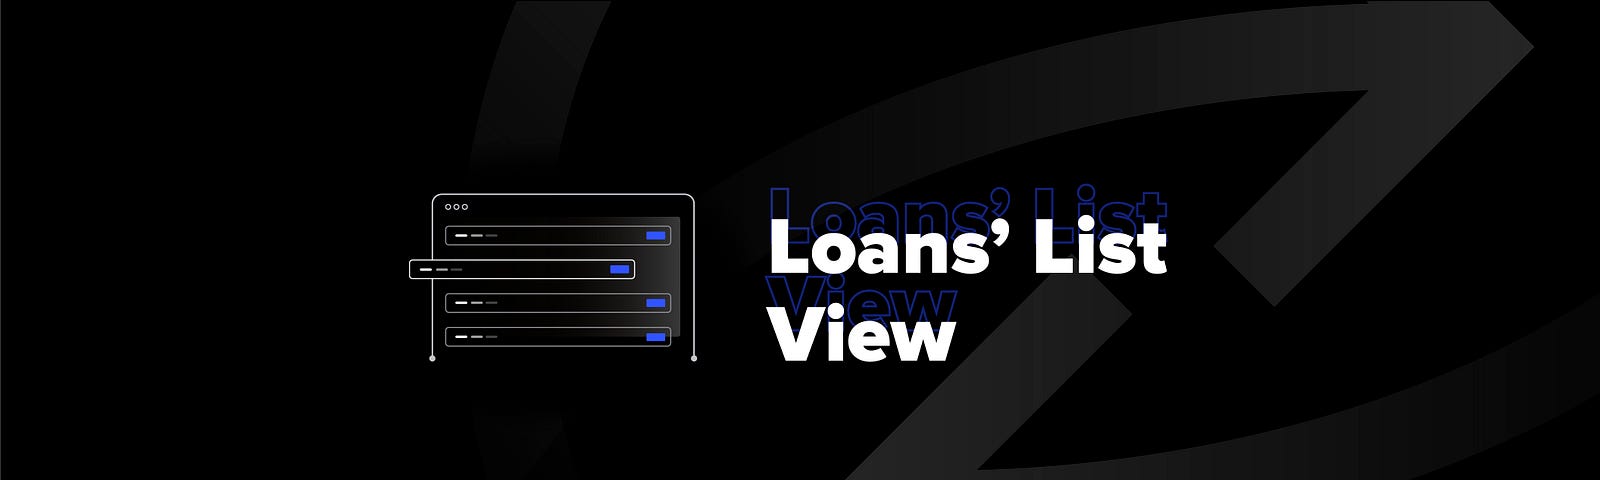 Say hi to the Loans’ List View!